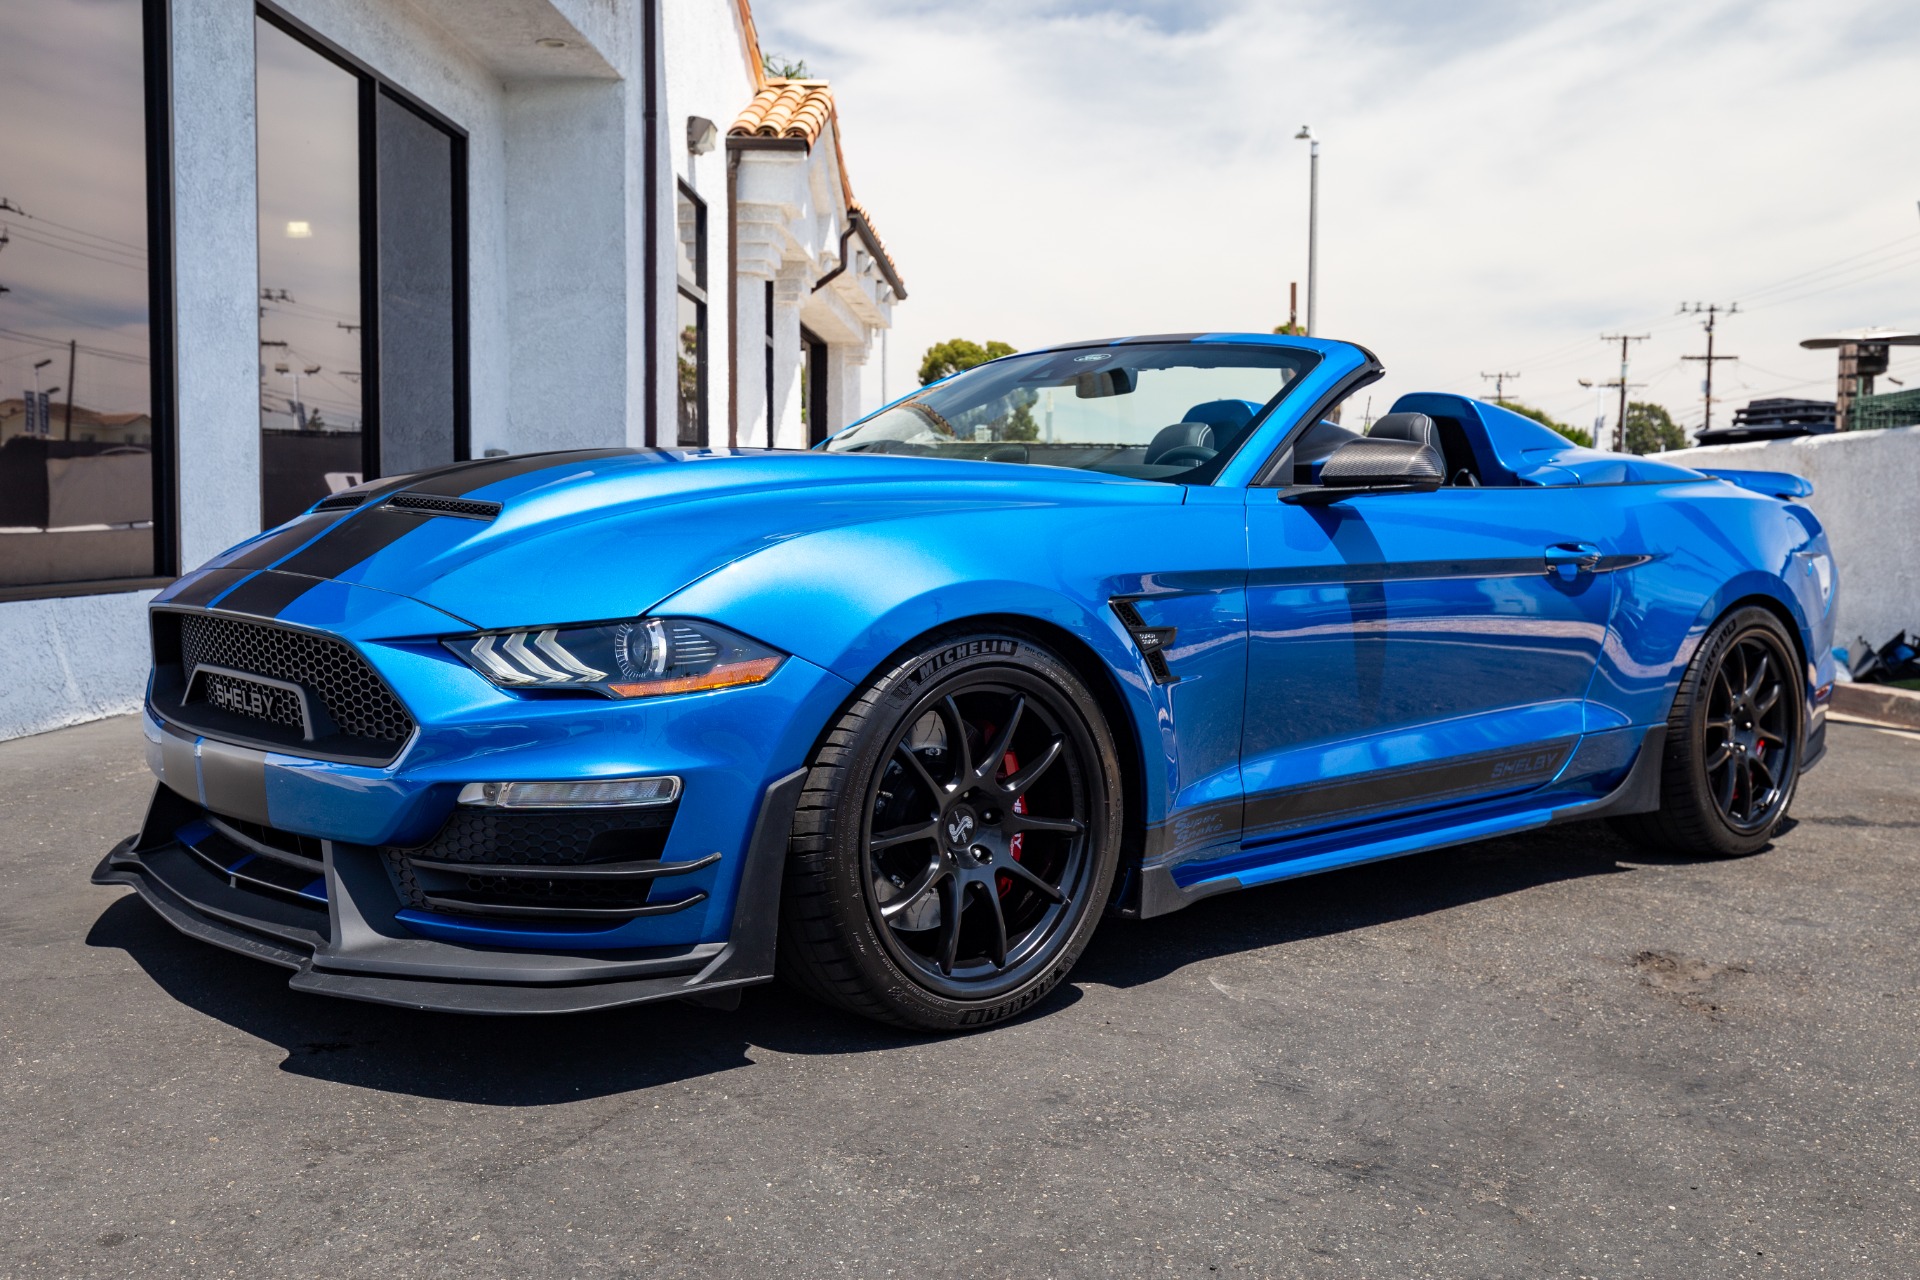 Used 2021 Ford Mustang Shelby Super Snake Speedster For Sale (Sold